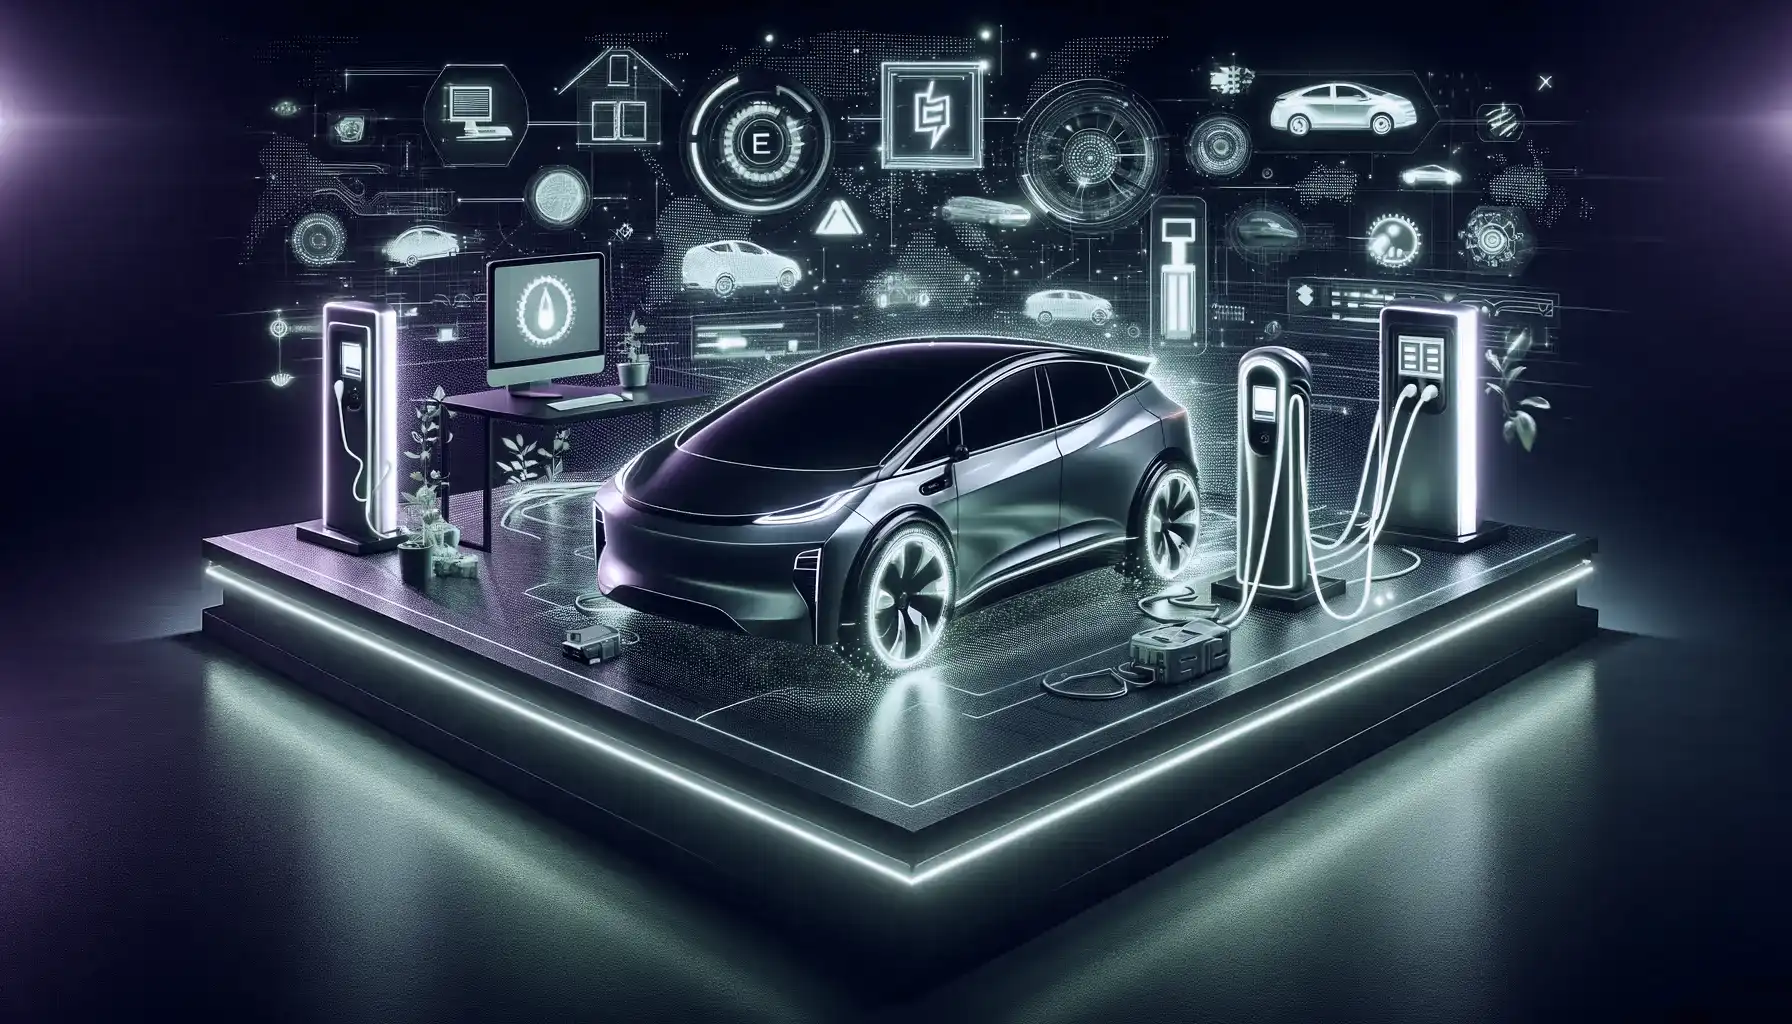 Image showcasing e-mobility solutions for the electric vehicle revolution, featuring a sleek, modern electric car at the center. The car is surrounded by elements like charging stations and digital interfaces, symbolizing advanced e-mobility strategies and toolkits. The entire scene is illuminated in vibrant neon green and purple lights, creating a futuristic and technologically advanced atmosphere. The background is abstract, emphasizing the innovative and forward-thinking nature of electric vehicle technology